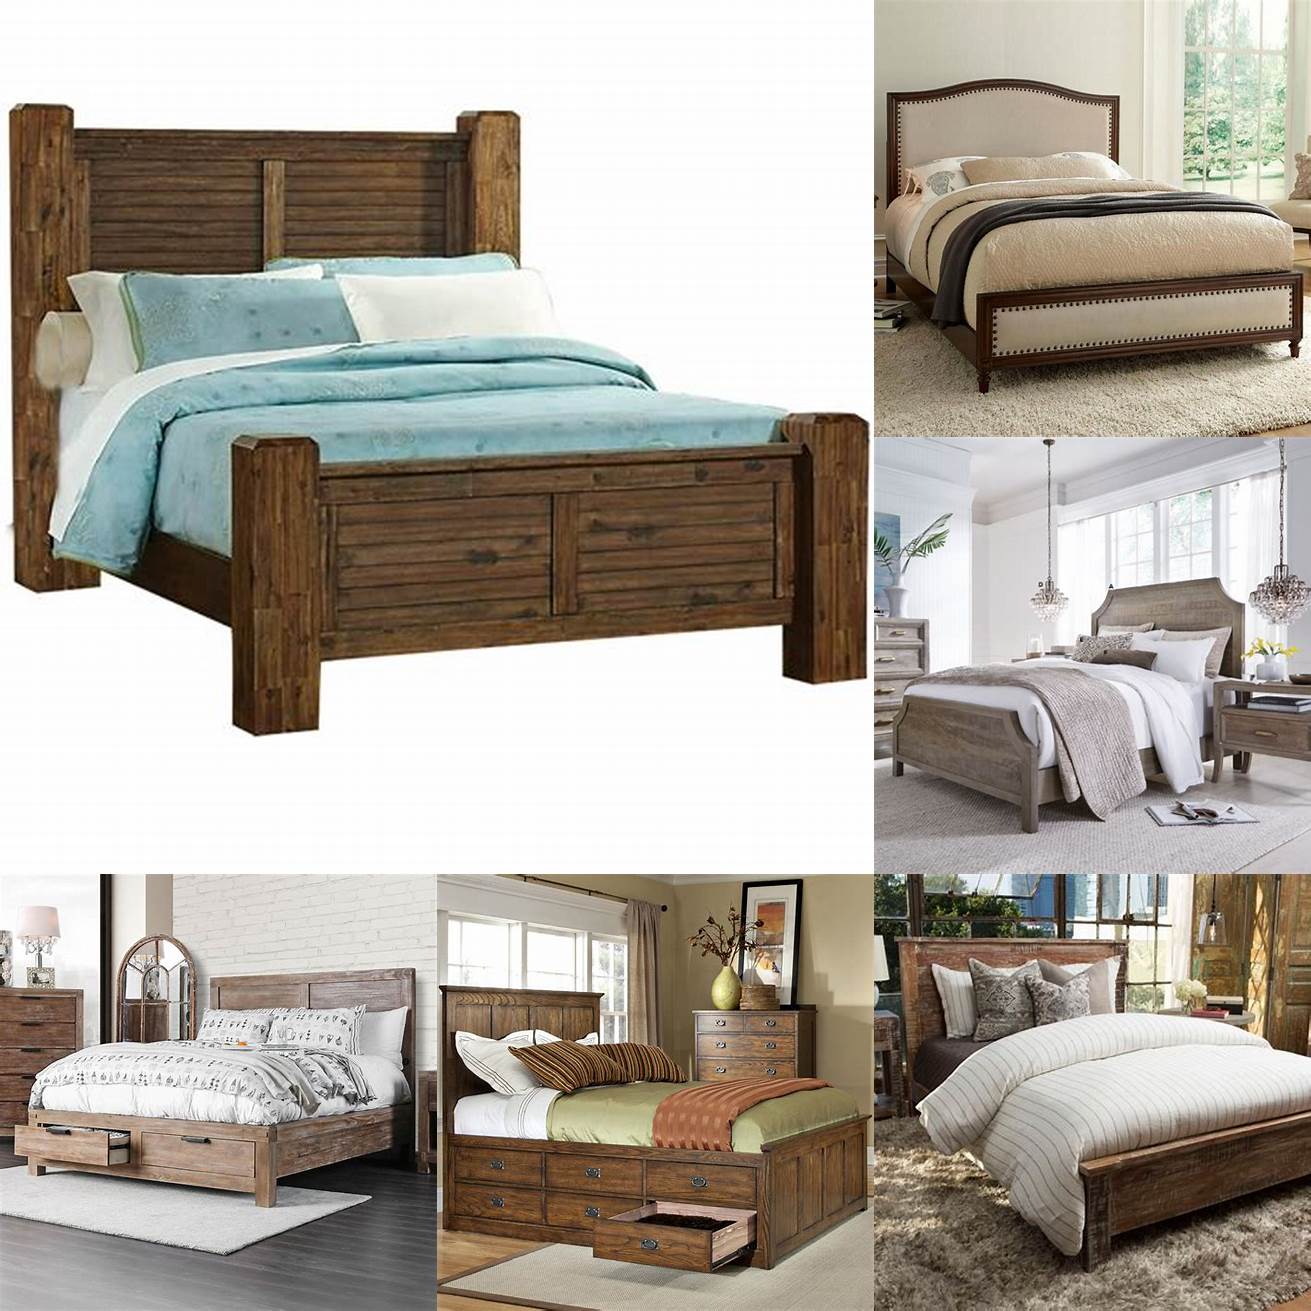 Wooden California King Size Bed Frame